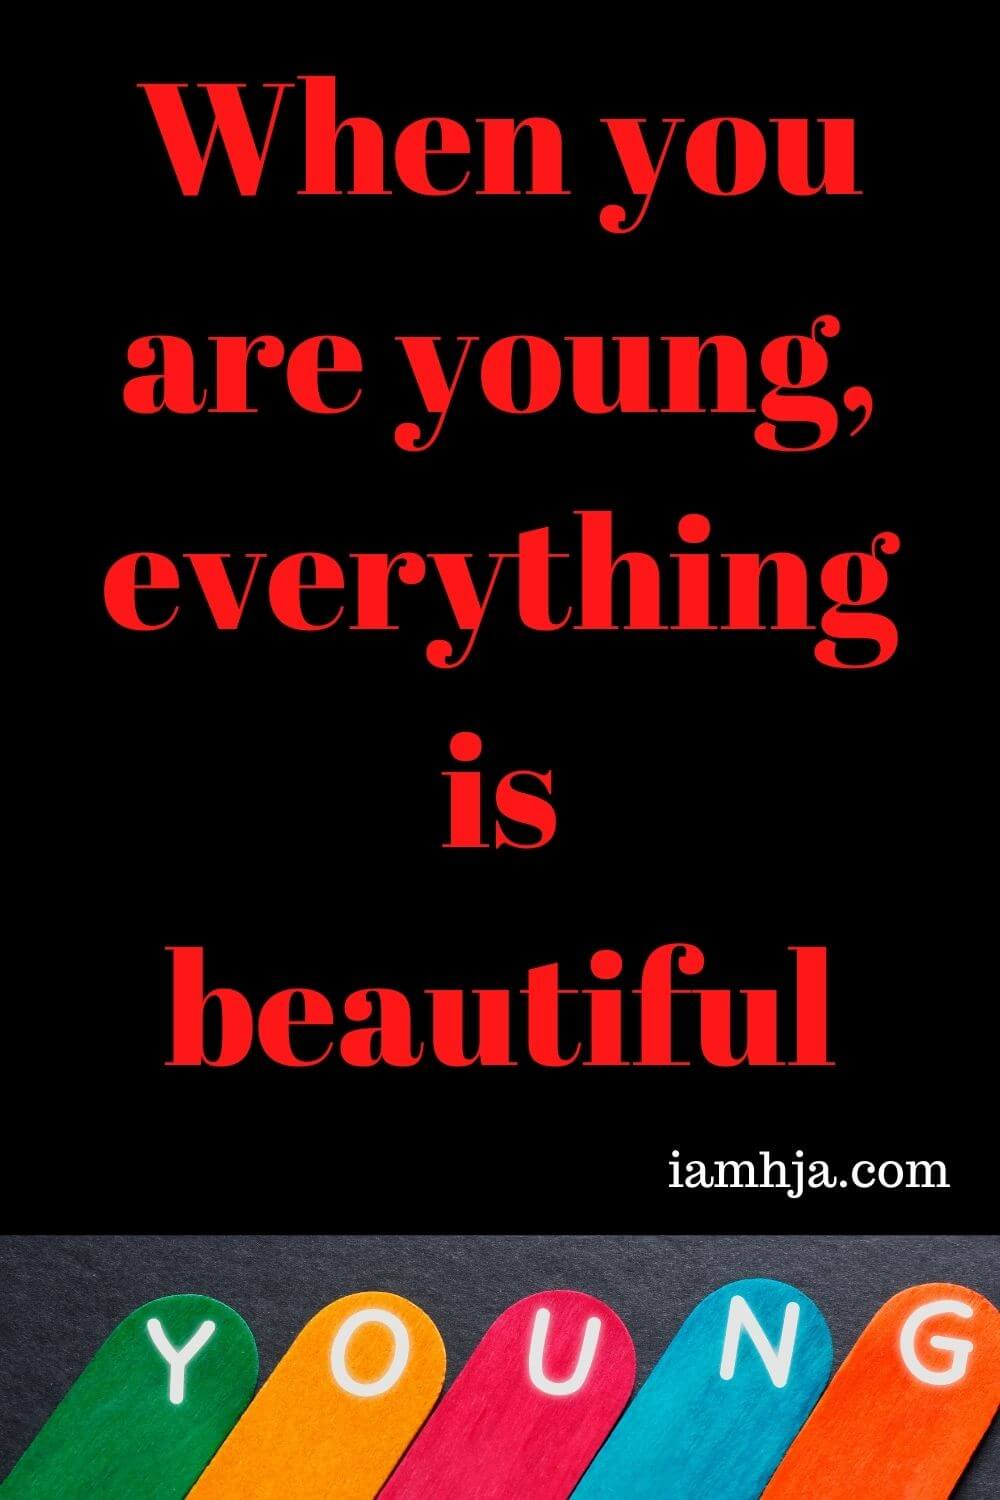 When you are young, everything is beautiful